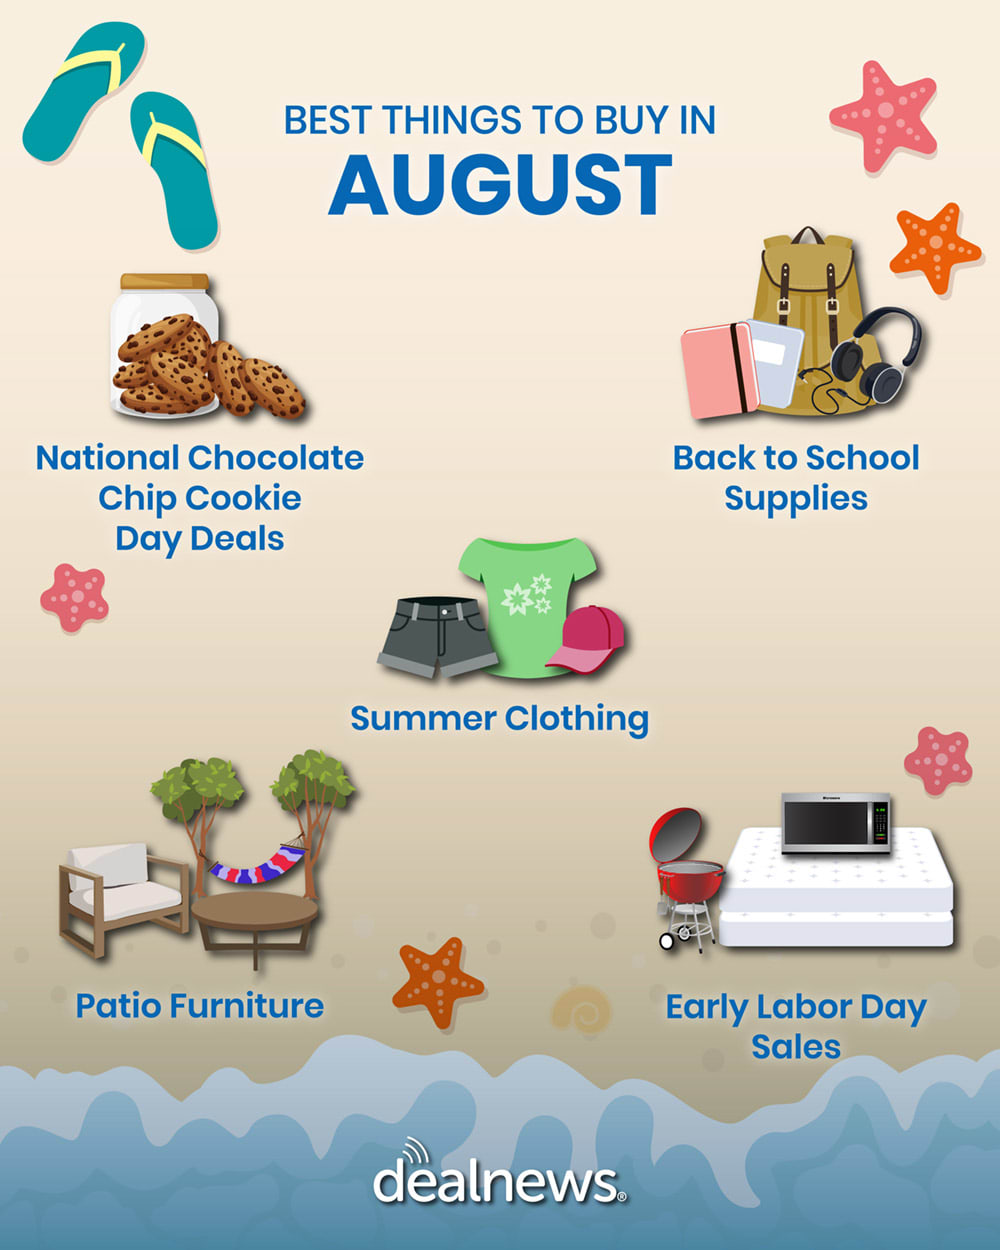 Five of the best things to buy in August depicted in an infographic.